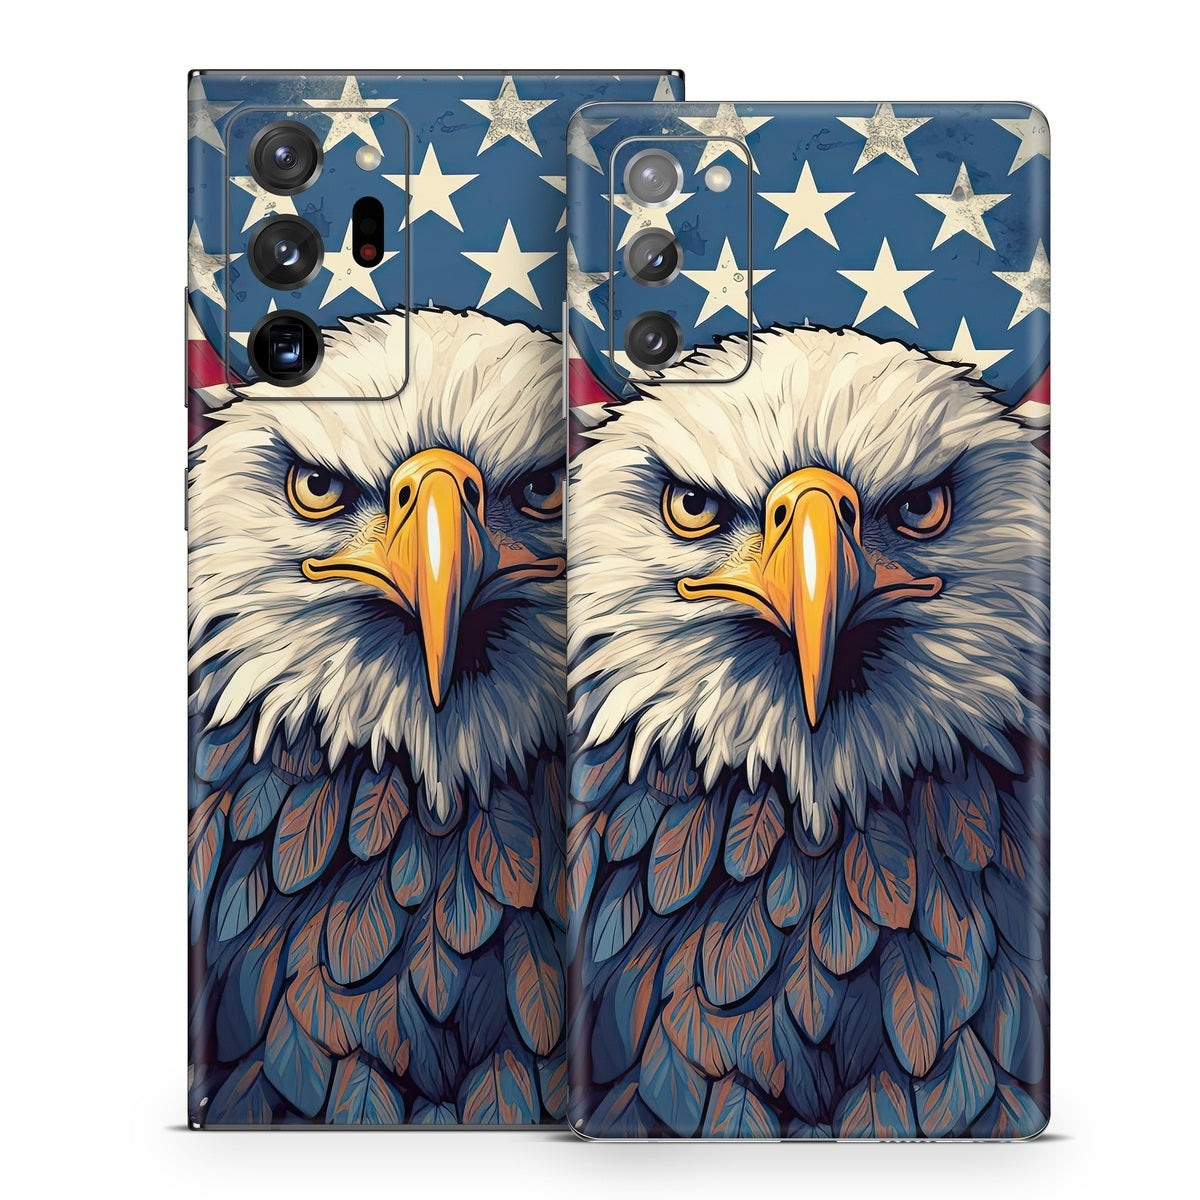 Proudly We Hail - Samsung Galaxy Note 20 Skin